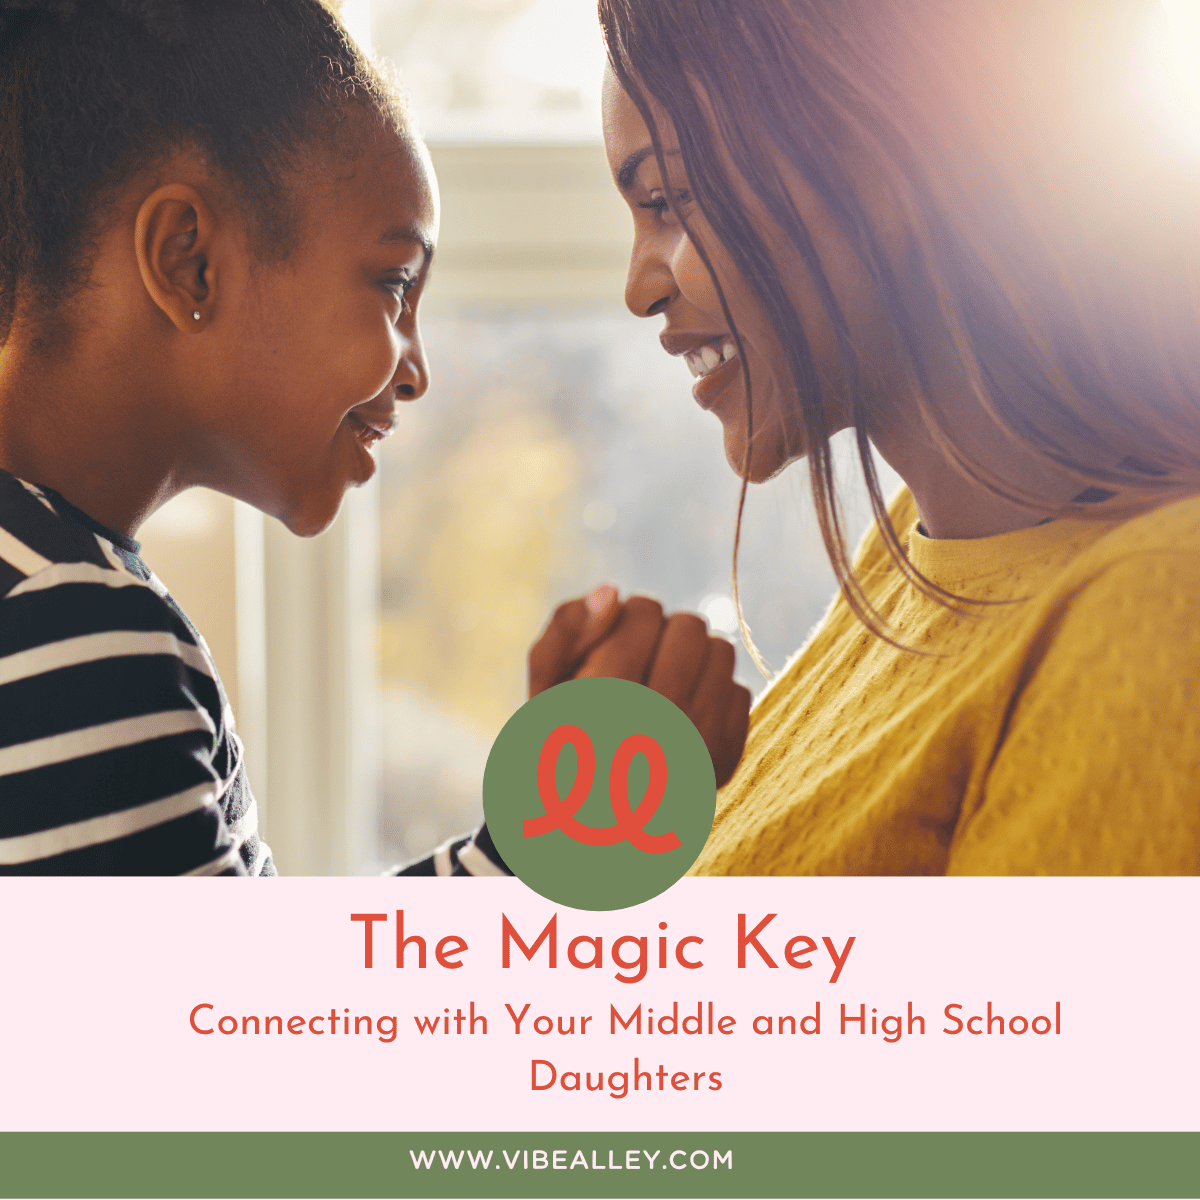 The Magic Key: Connecting with Your Middle and High School Daughters